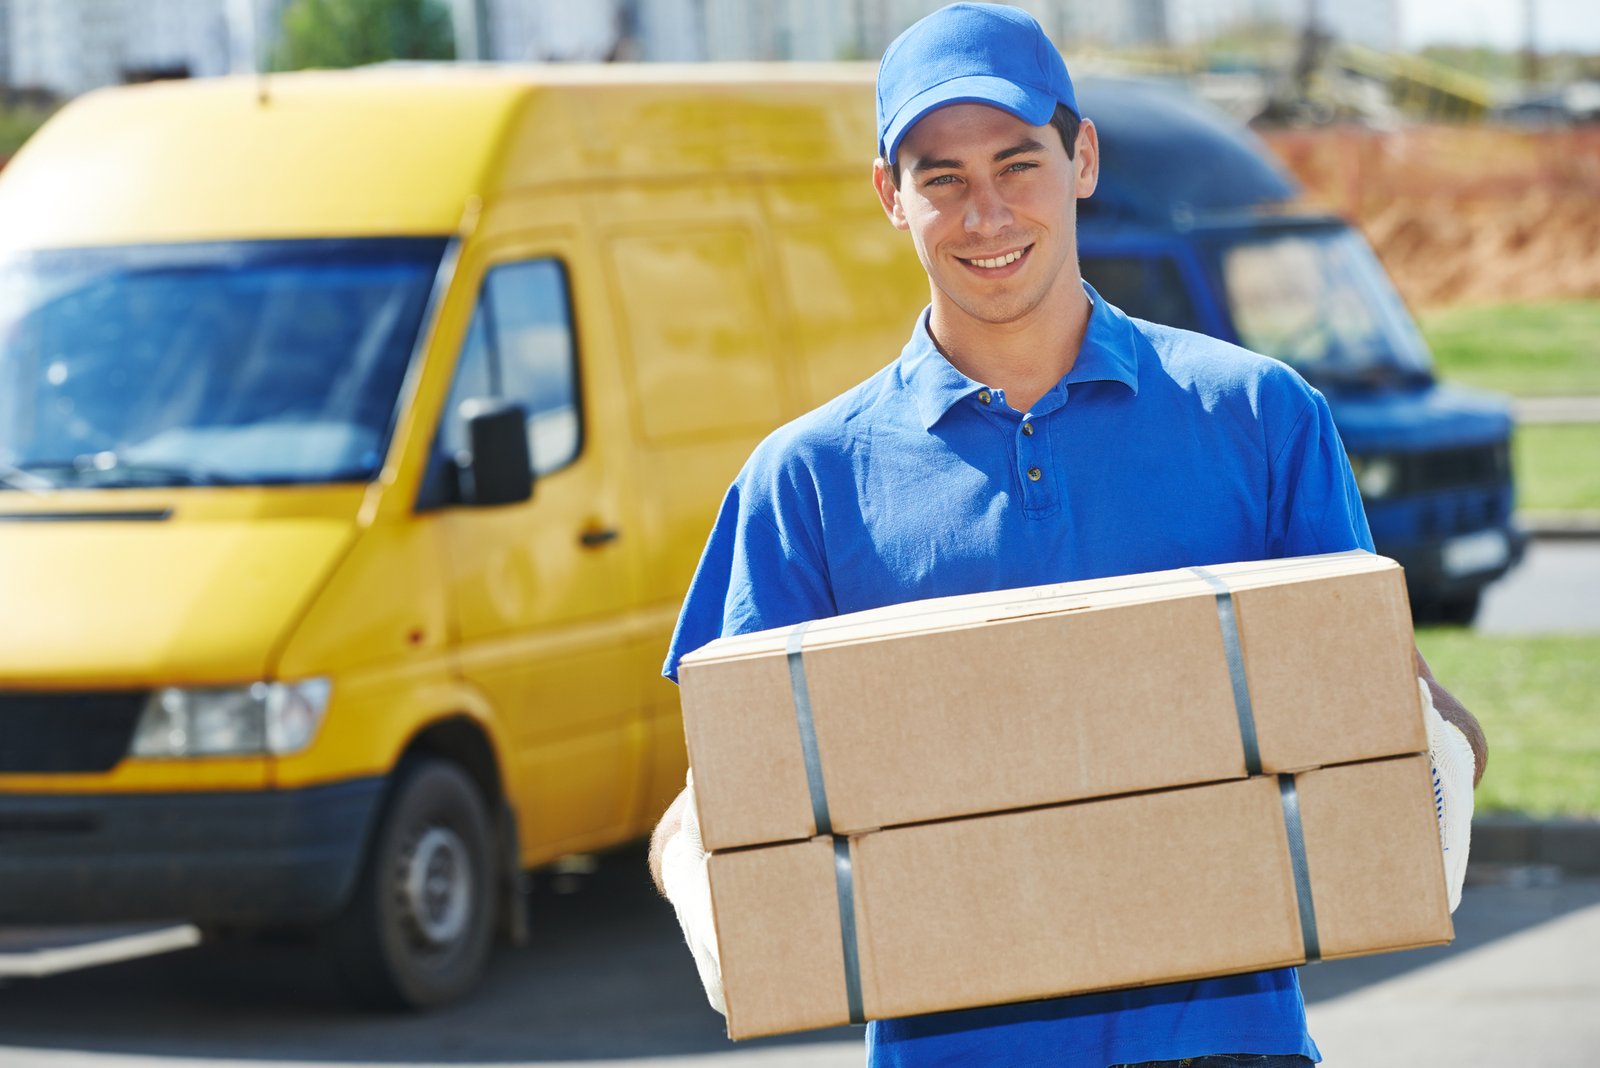 Online local parcel Delivery Services